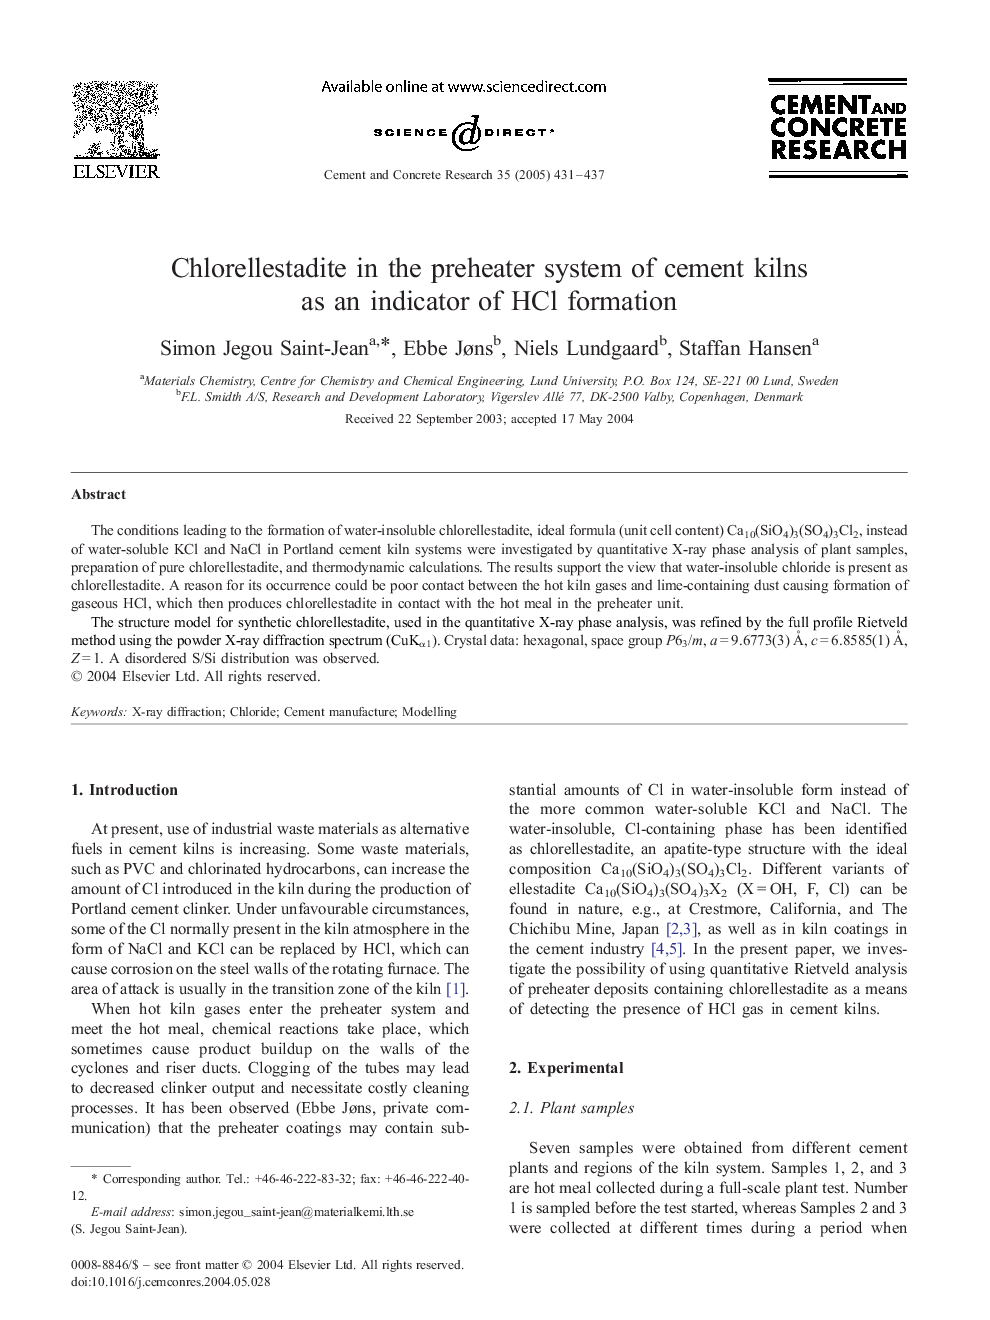 Chlorellestadite in the preheater system of cement kilns as an indicator of HCl formation